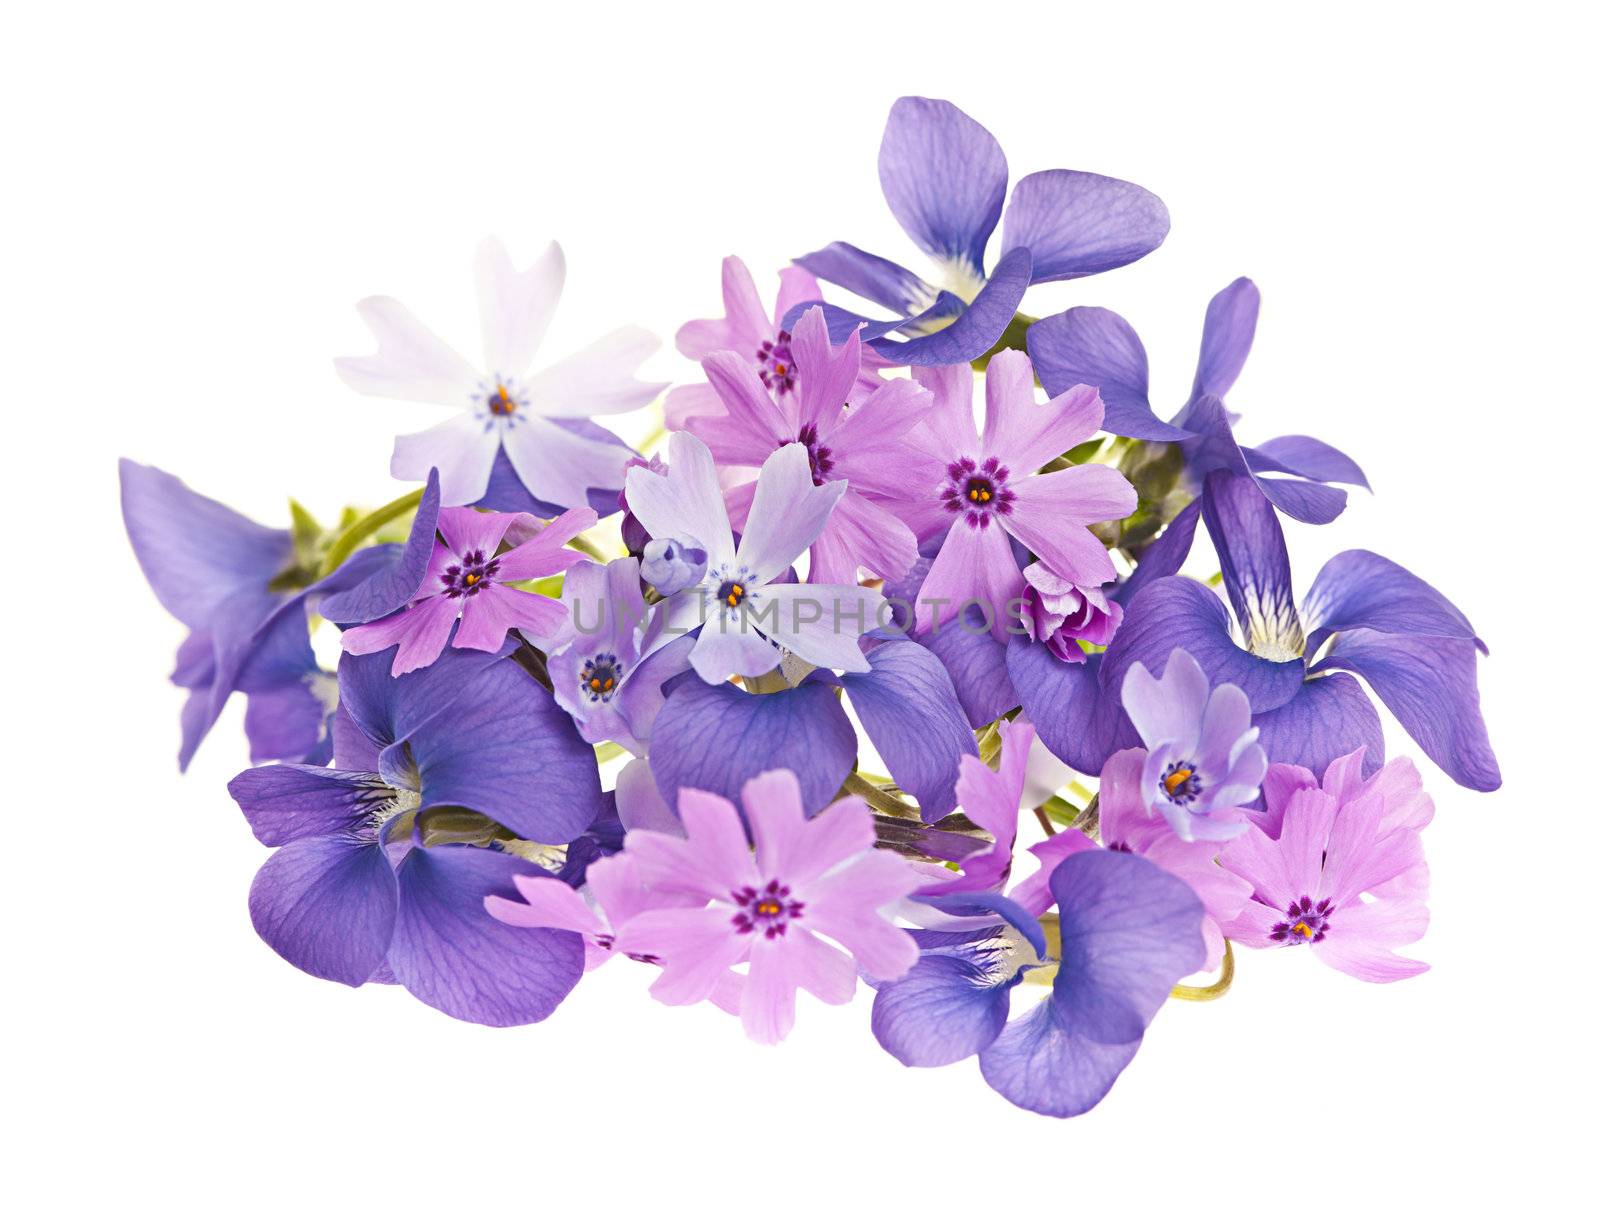 Arrangement of spring flowers purple violets and moss pink isolated on white background